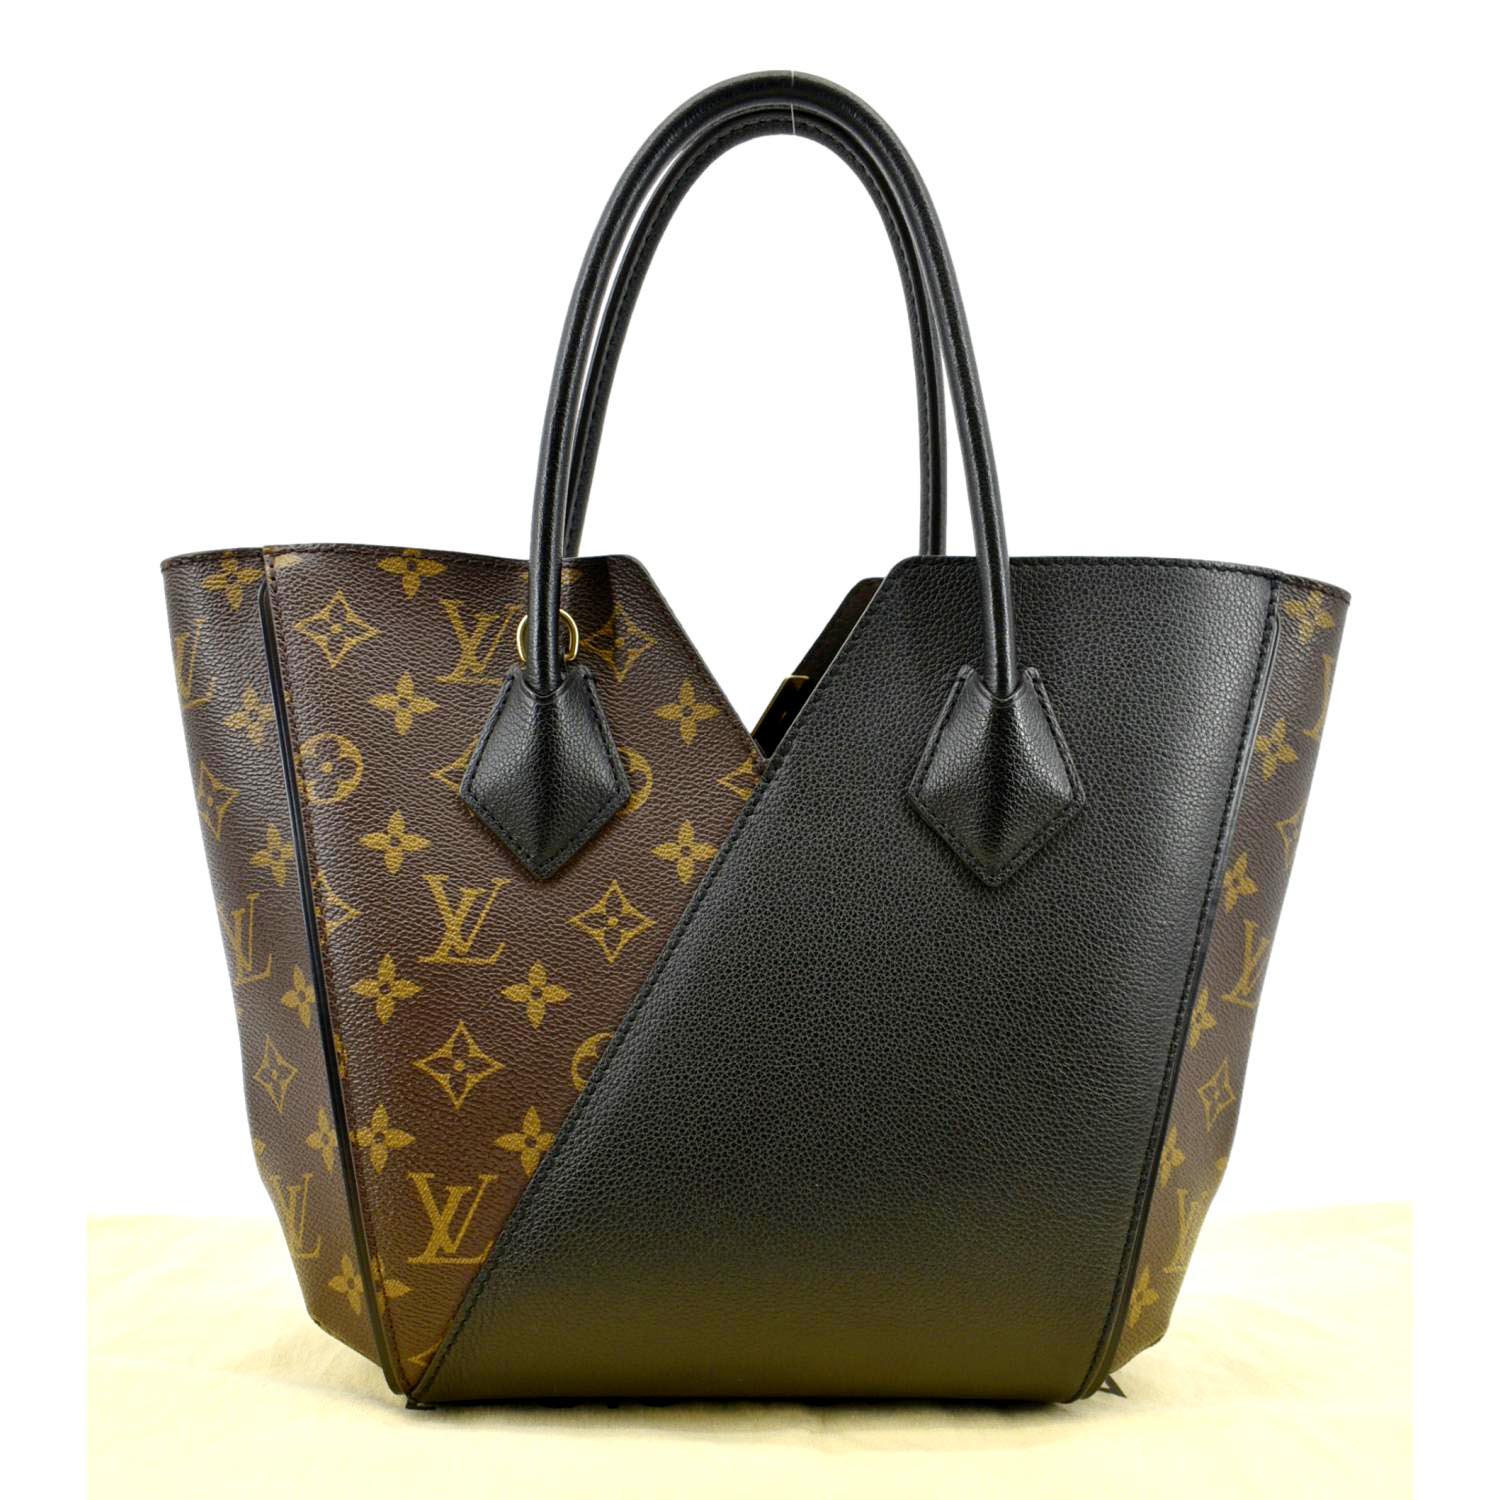 Louis Vuitton Monogram Clutch Black in Calfskin Leather with Gold